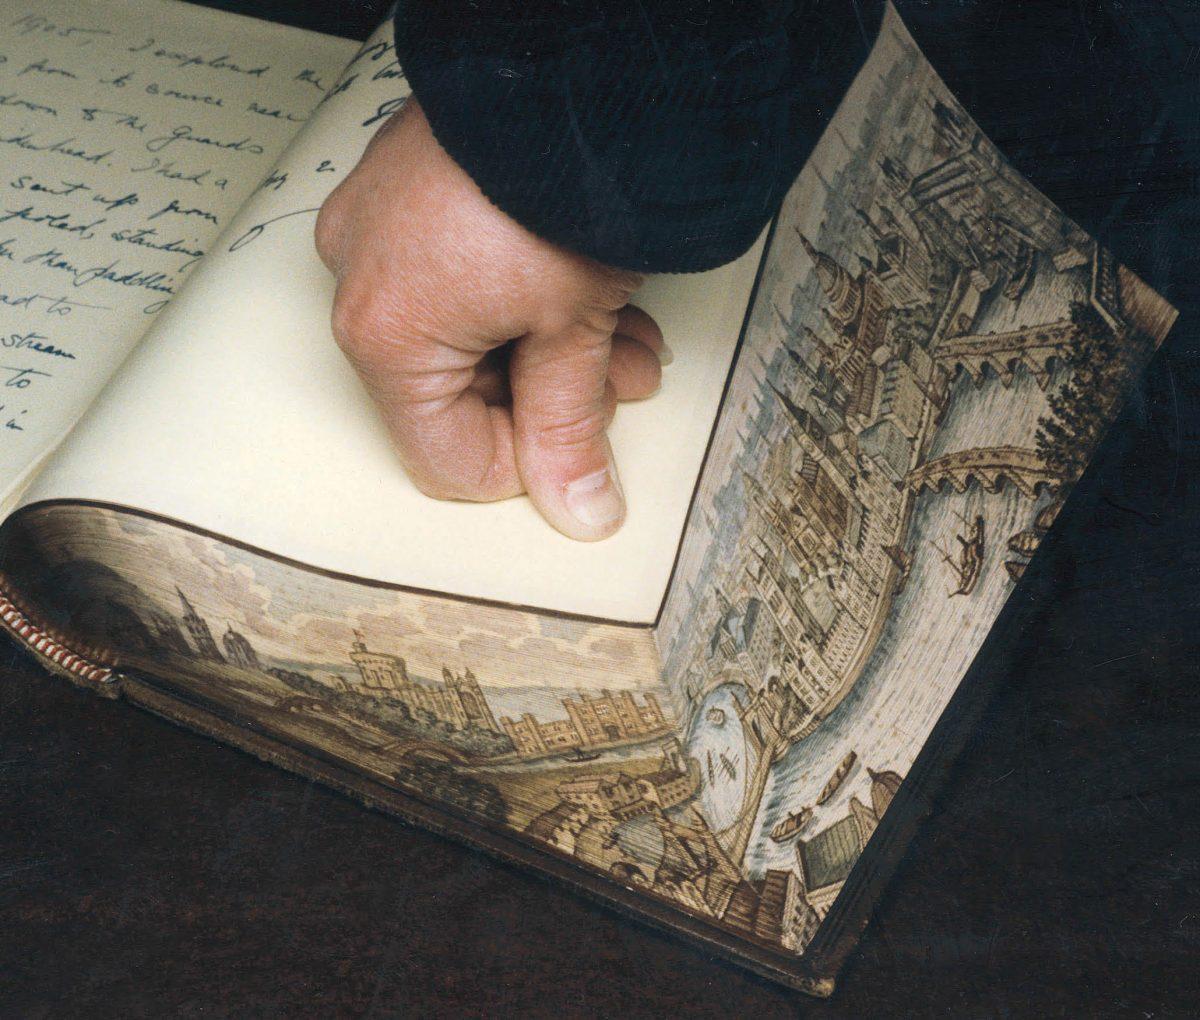 Fore-edge painter Martin Frost paints scenes on the edges of books, a skill critically endangered in the UK. (Foredgefrost)